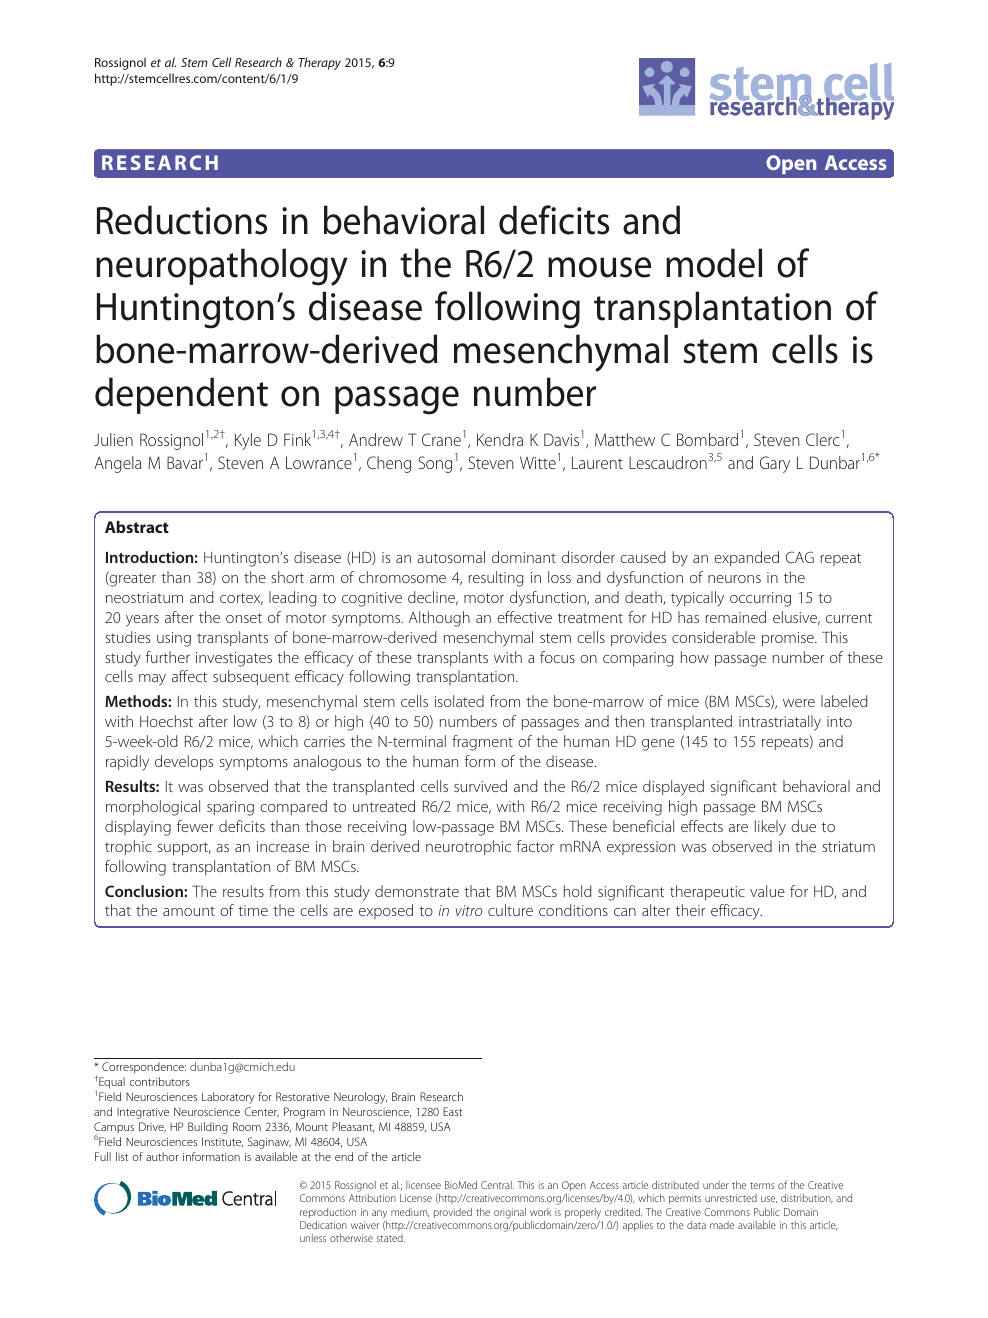 Reductions In Behavioral Deficits And Neuropathology In The R6 2 Mouse Model Of Huntington S Disease Following Transplantation Of Bone Marrow Derived Mesenchymal Stem Cells Is Dependent On Passage Number Topic Of Research Paper In